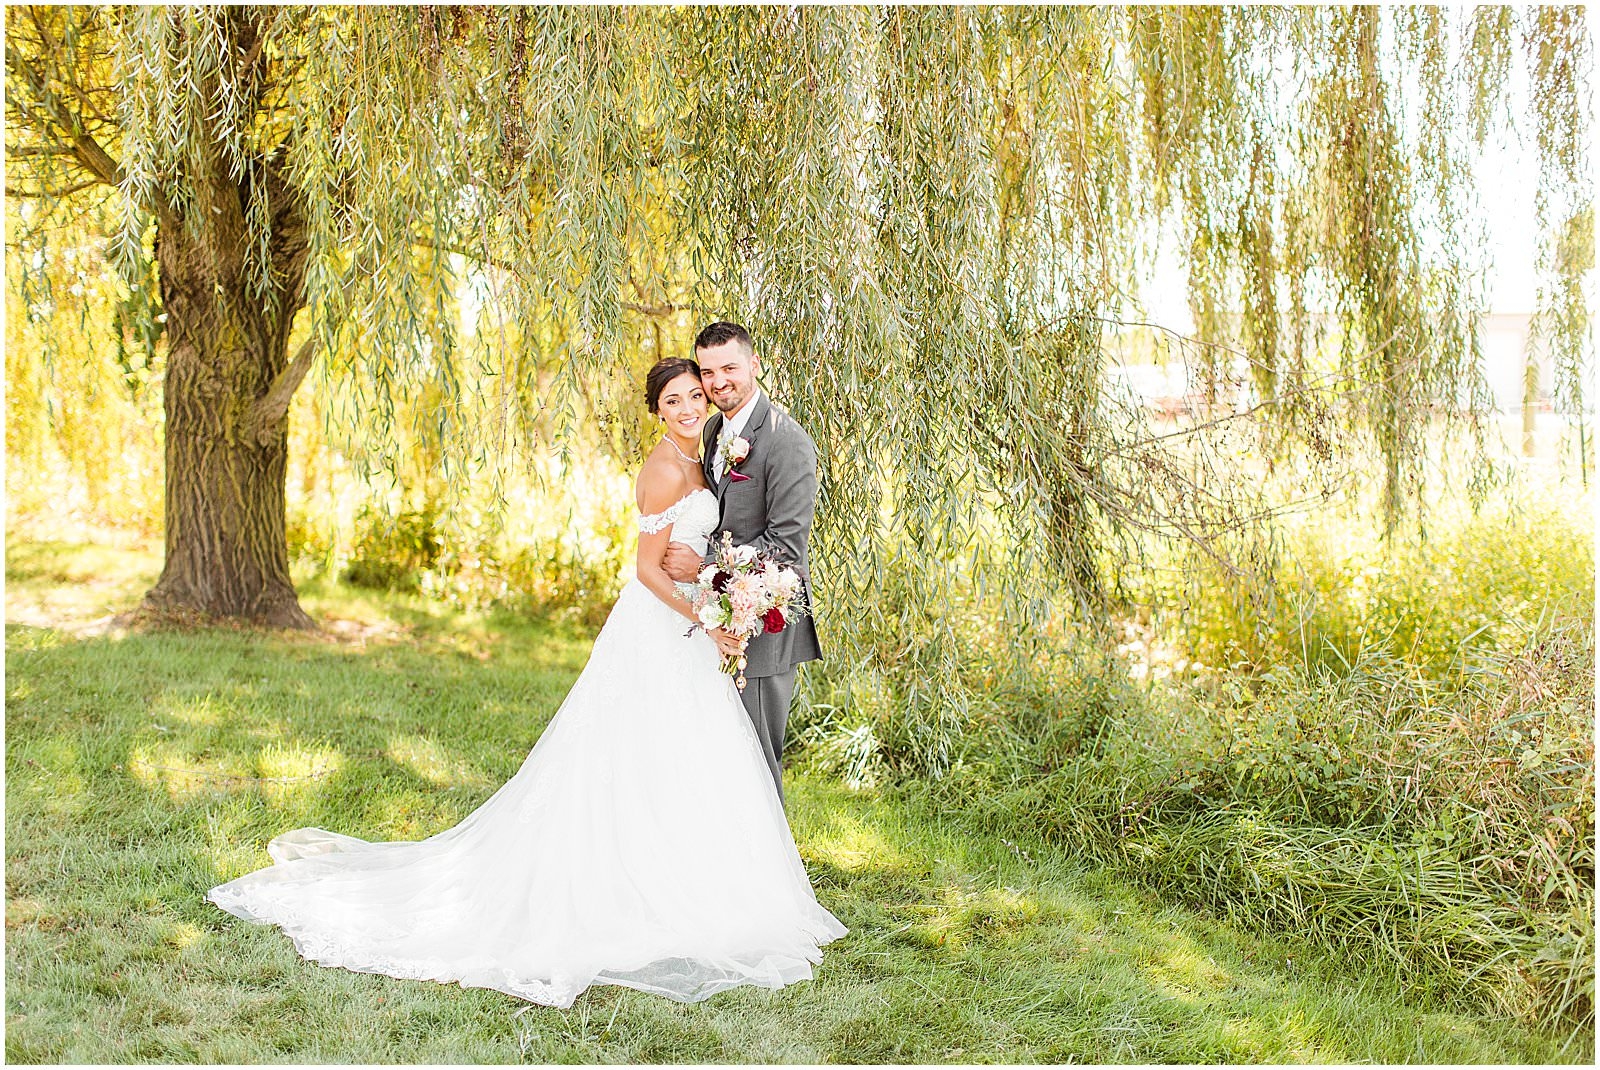 A Stunning Fall Wedding in Indianapolis, IN |. Sally and Andrew | Bret and Brandie Photography 0065.jpg